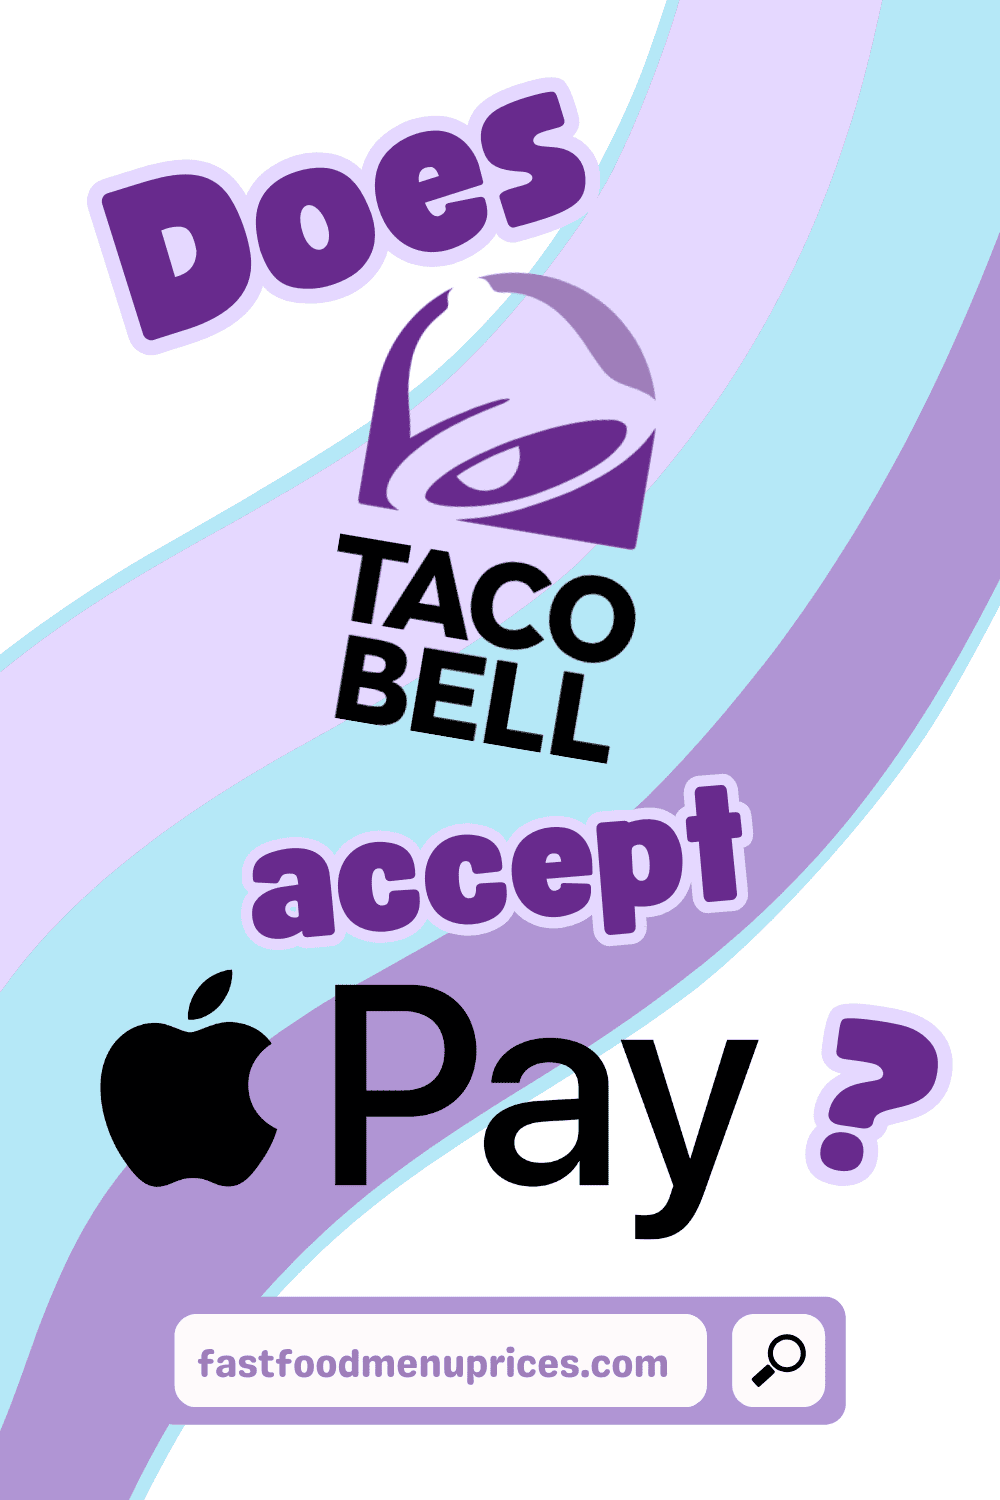 Does Taco Bell accept Apple Pay?